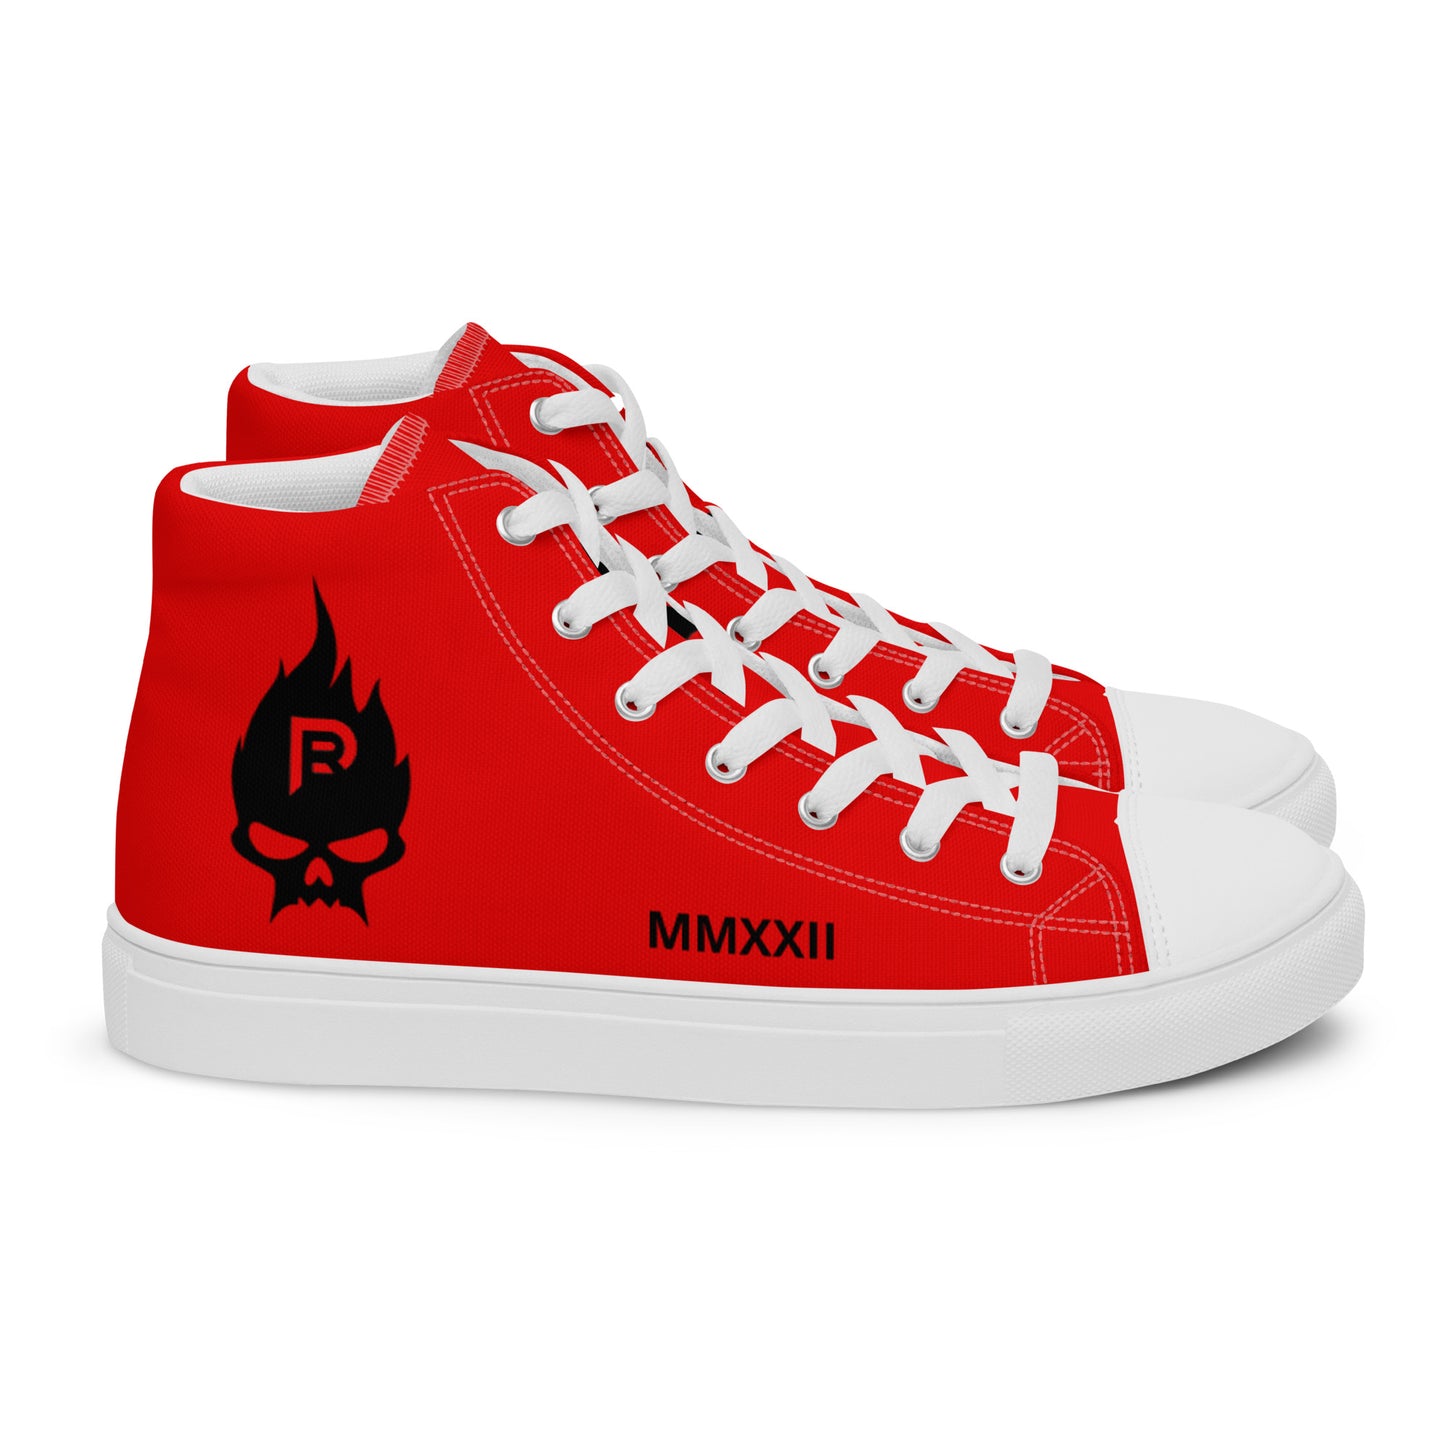 Red Weapon Demon High Top Canvas Shoes